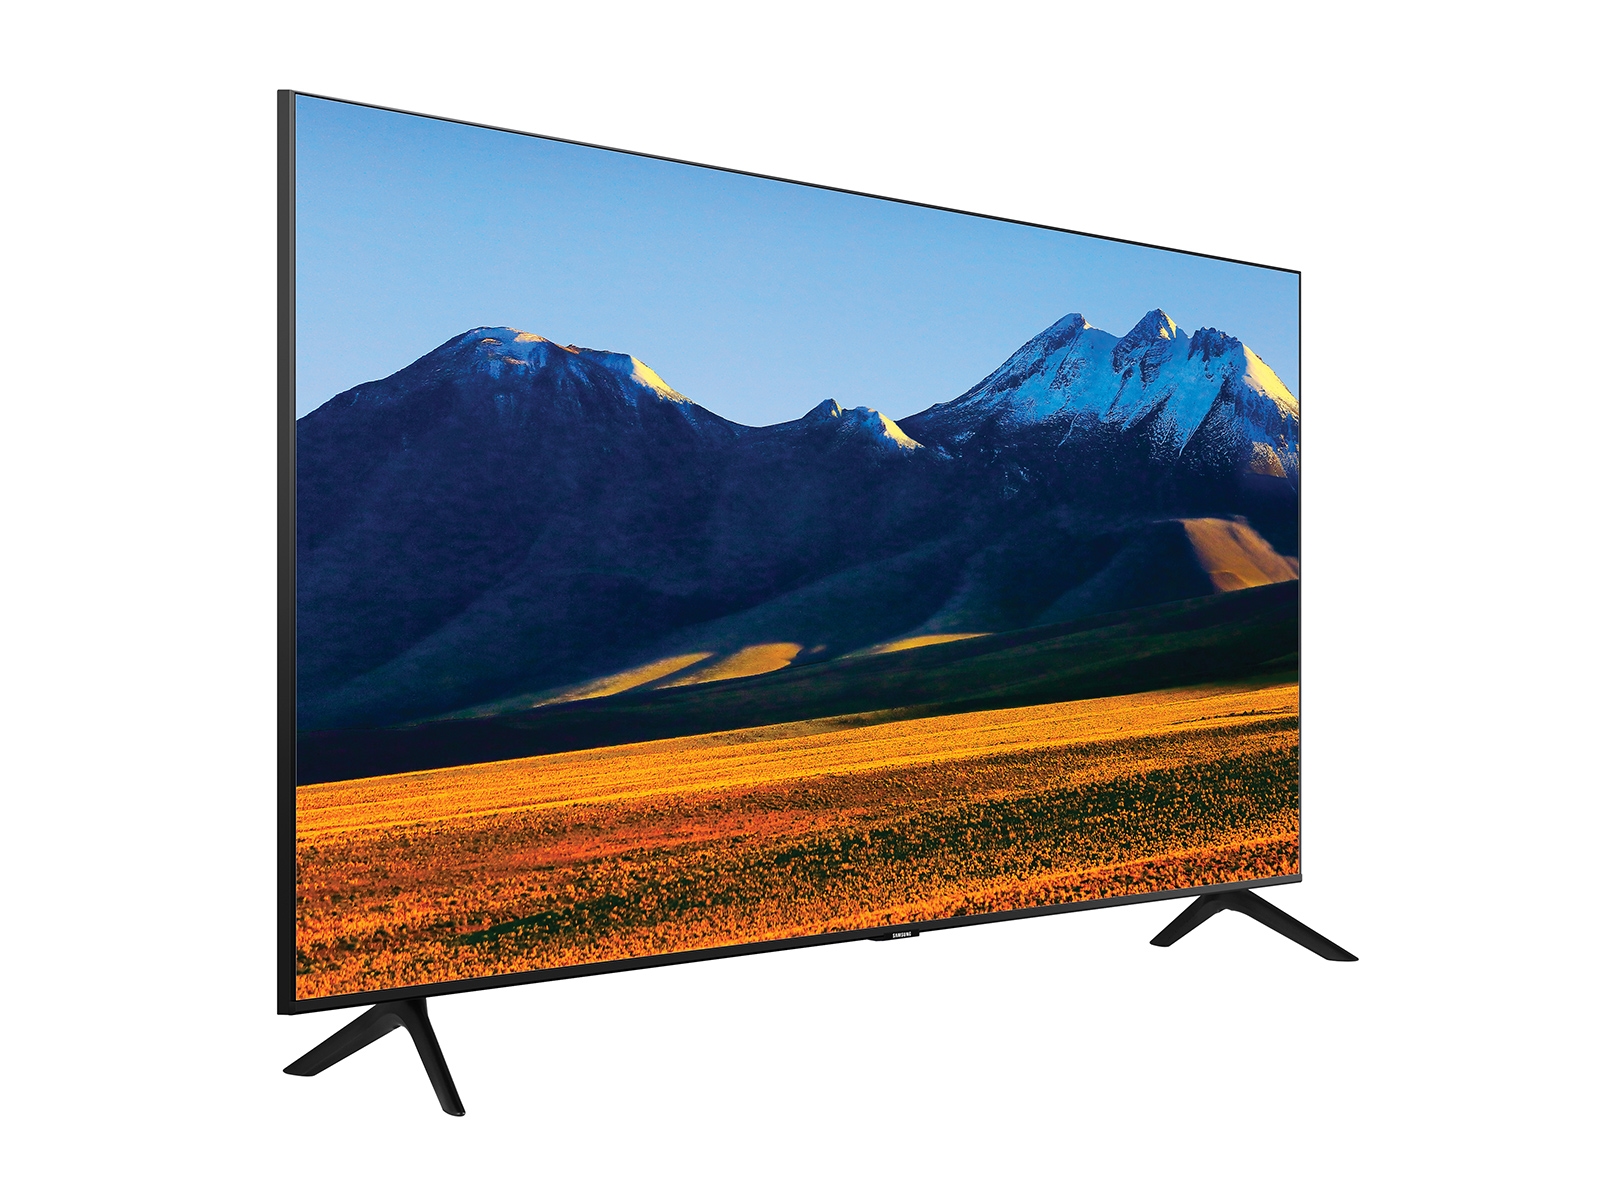 https://image-us.samsung.com/SamsungUS/home/televisions-and-home-theater/tvs/crystal-uhd-tvs/un86tu9010fxza/gallery/2-TU9000_86UTH1_003_L-Perspective_Black-Metal-gallery-1600x1200.jpg?$product-details-jpg$